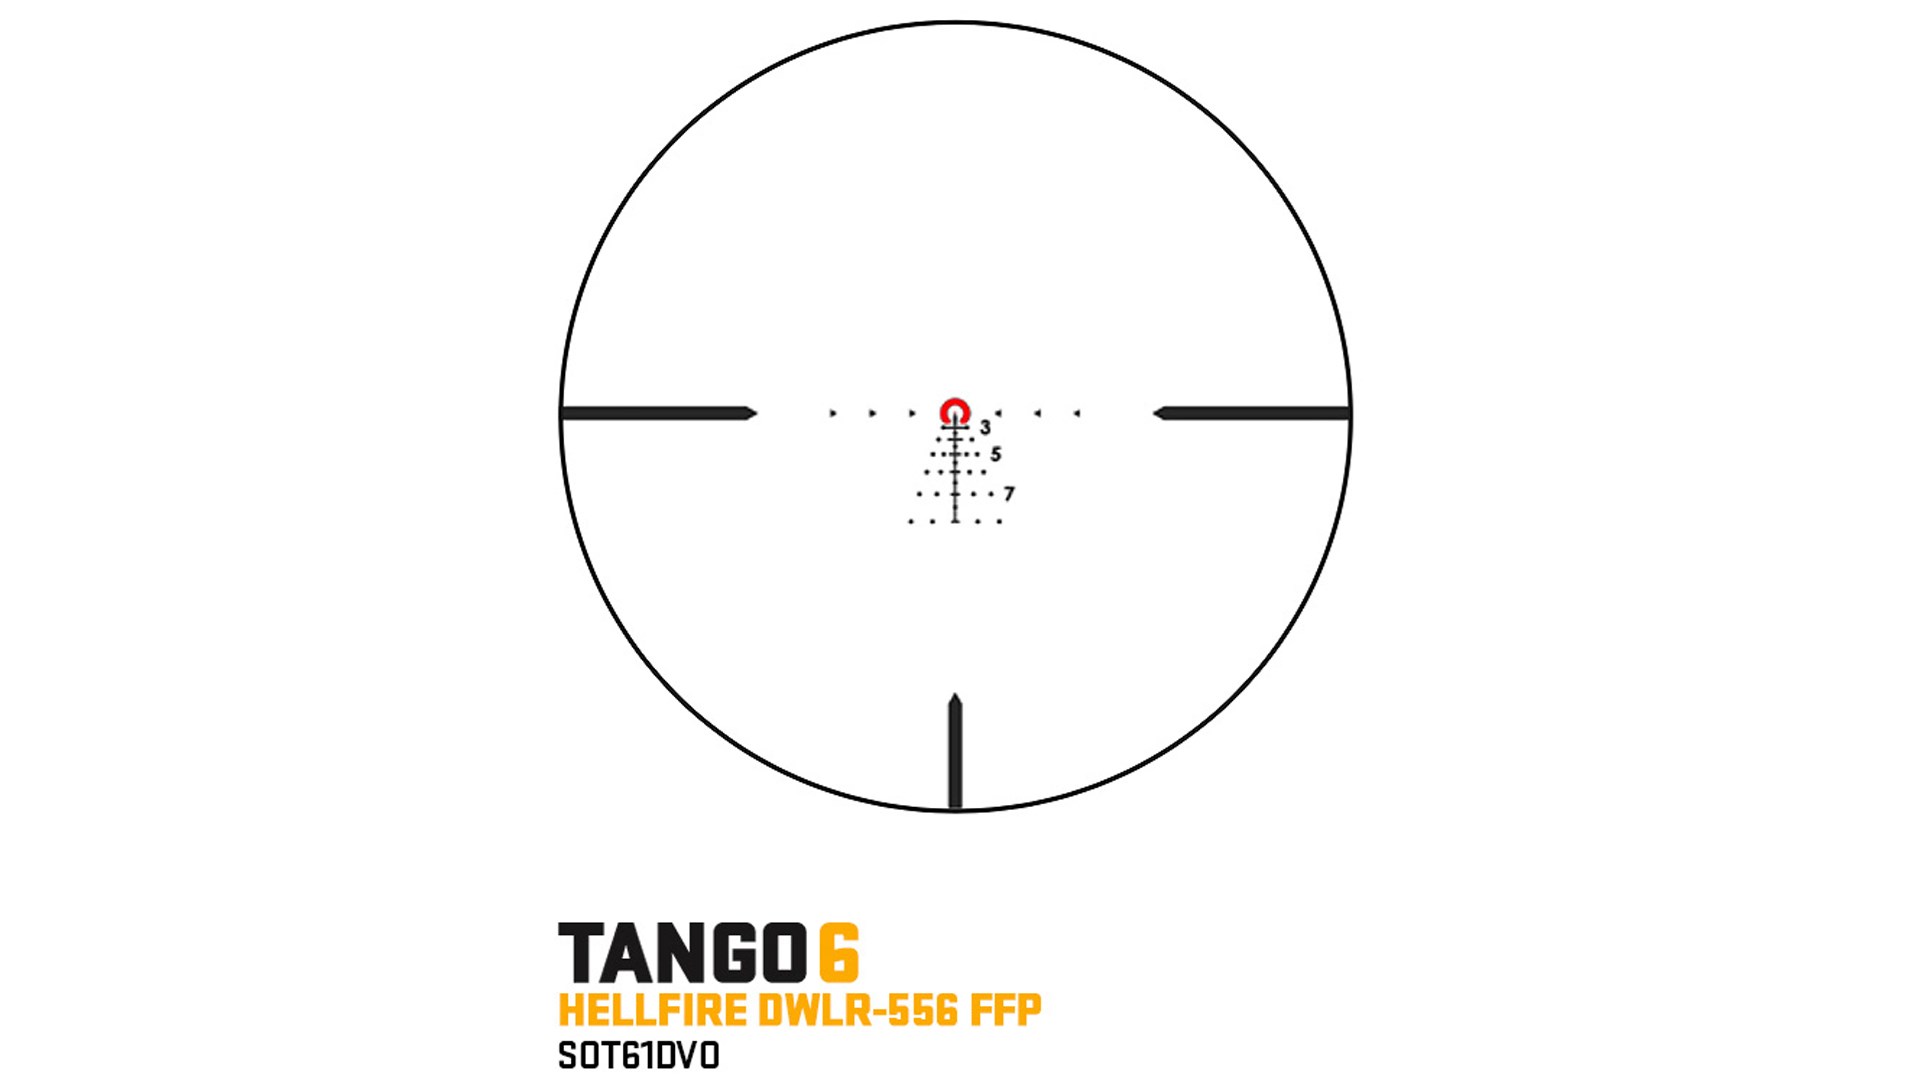 sig sauer tango6 hellfire dwlr-556 ffp reticle scope black circle red inner circle meridian line dotted tree ballistic